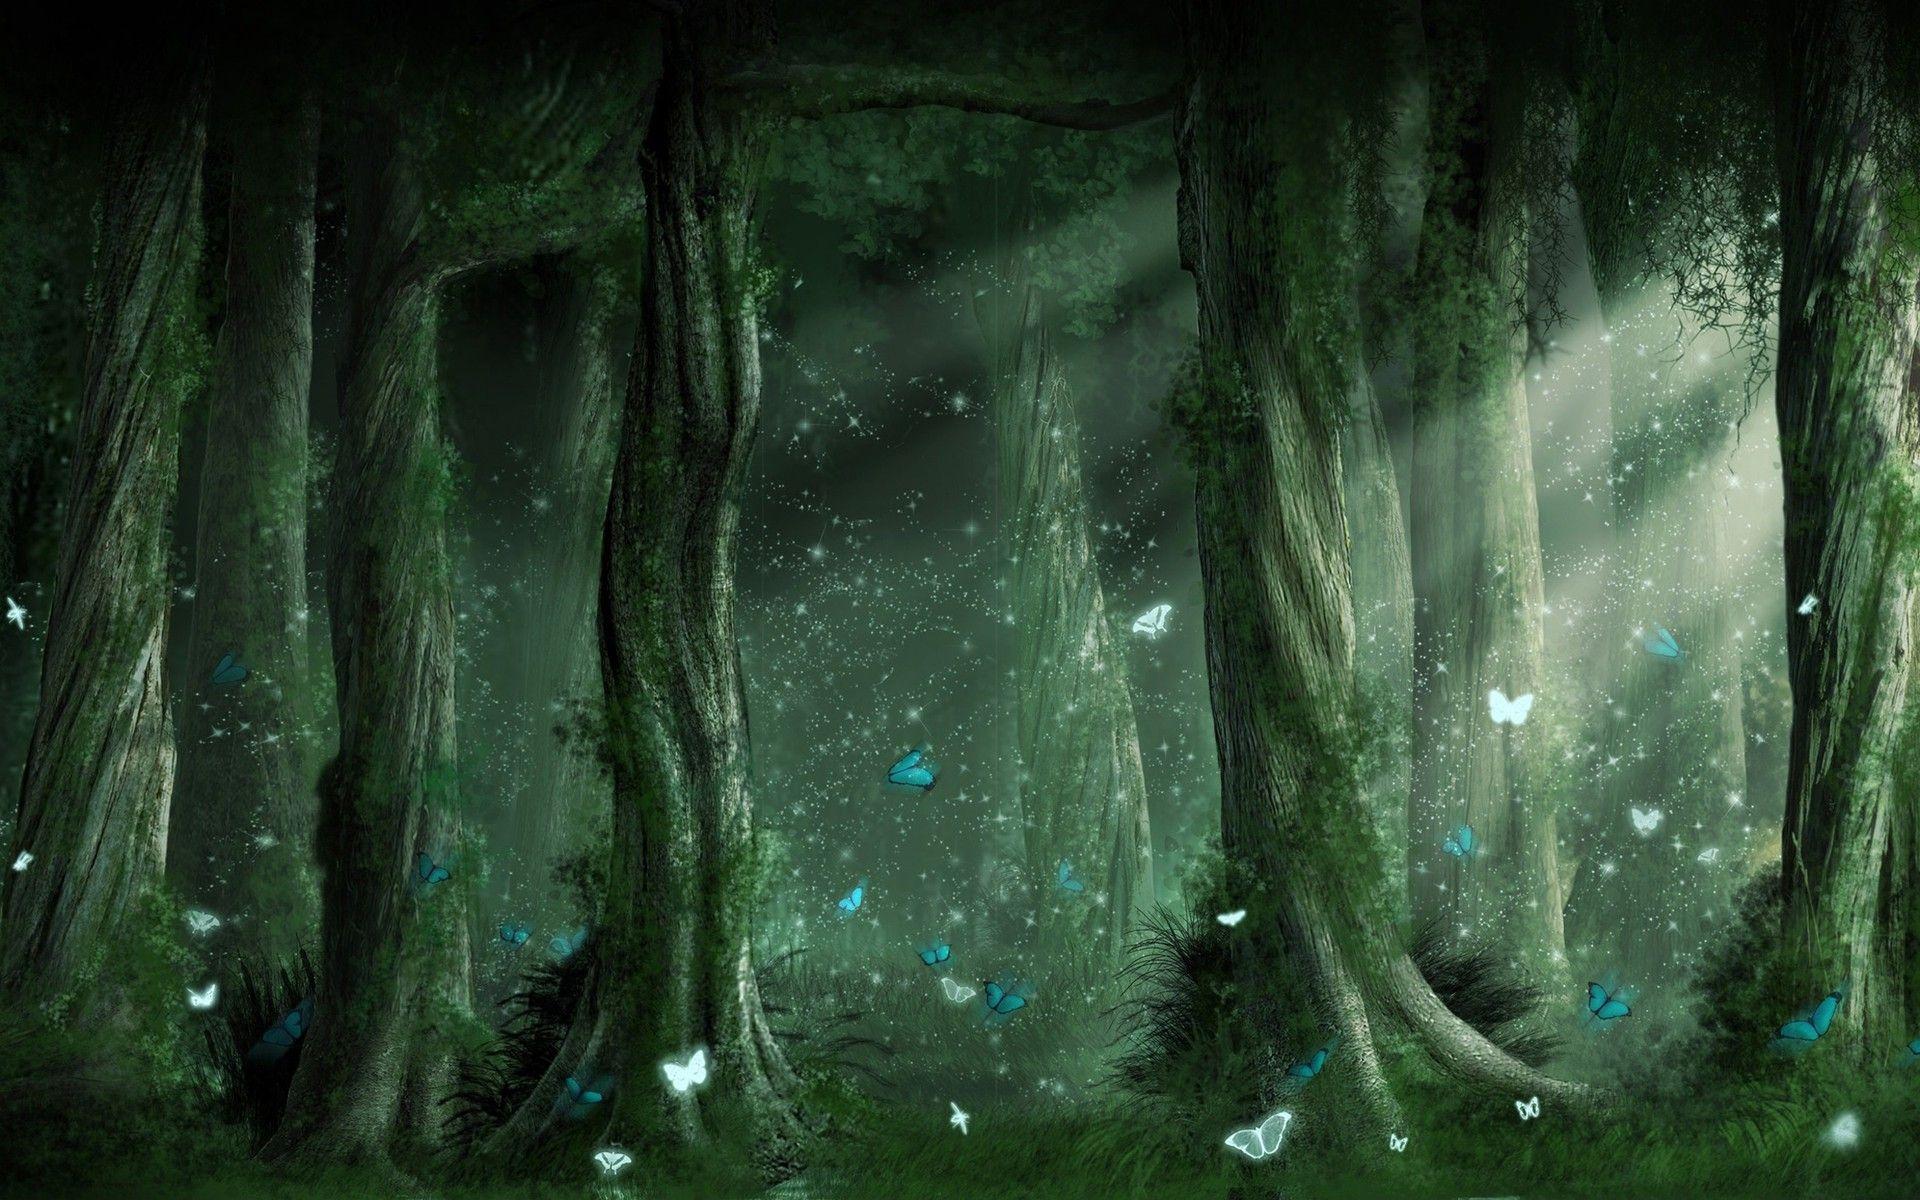 Magical Forest Wallpapers Top Free Magical Forest Backgrounds Wallpaperaccess